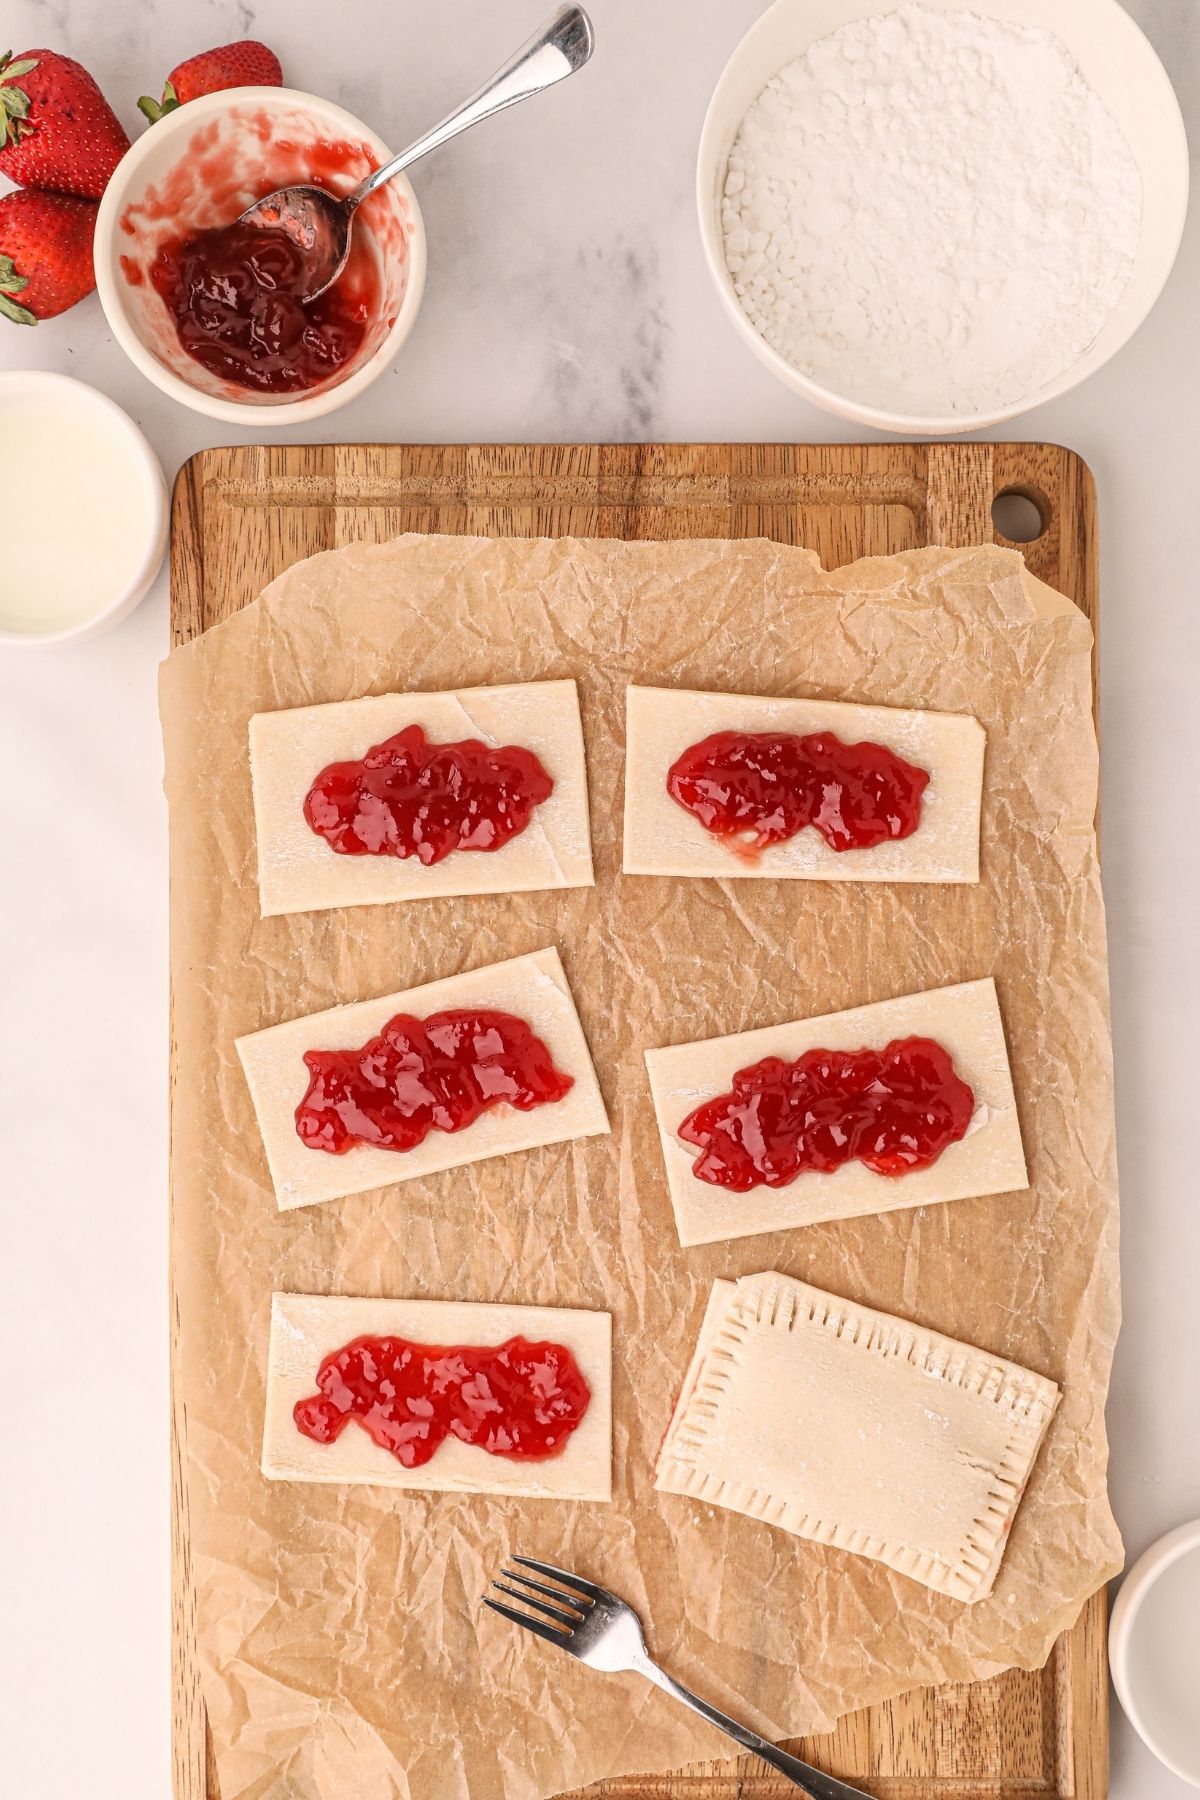 Pastry rectangles topped with strawberry jam on a cutting board